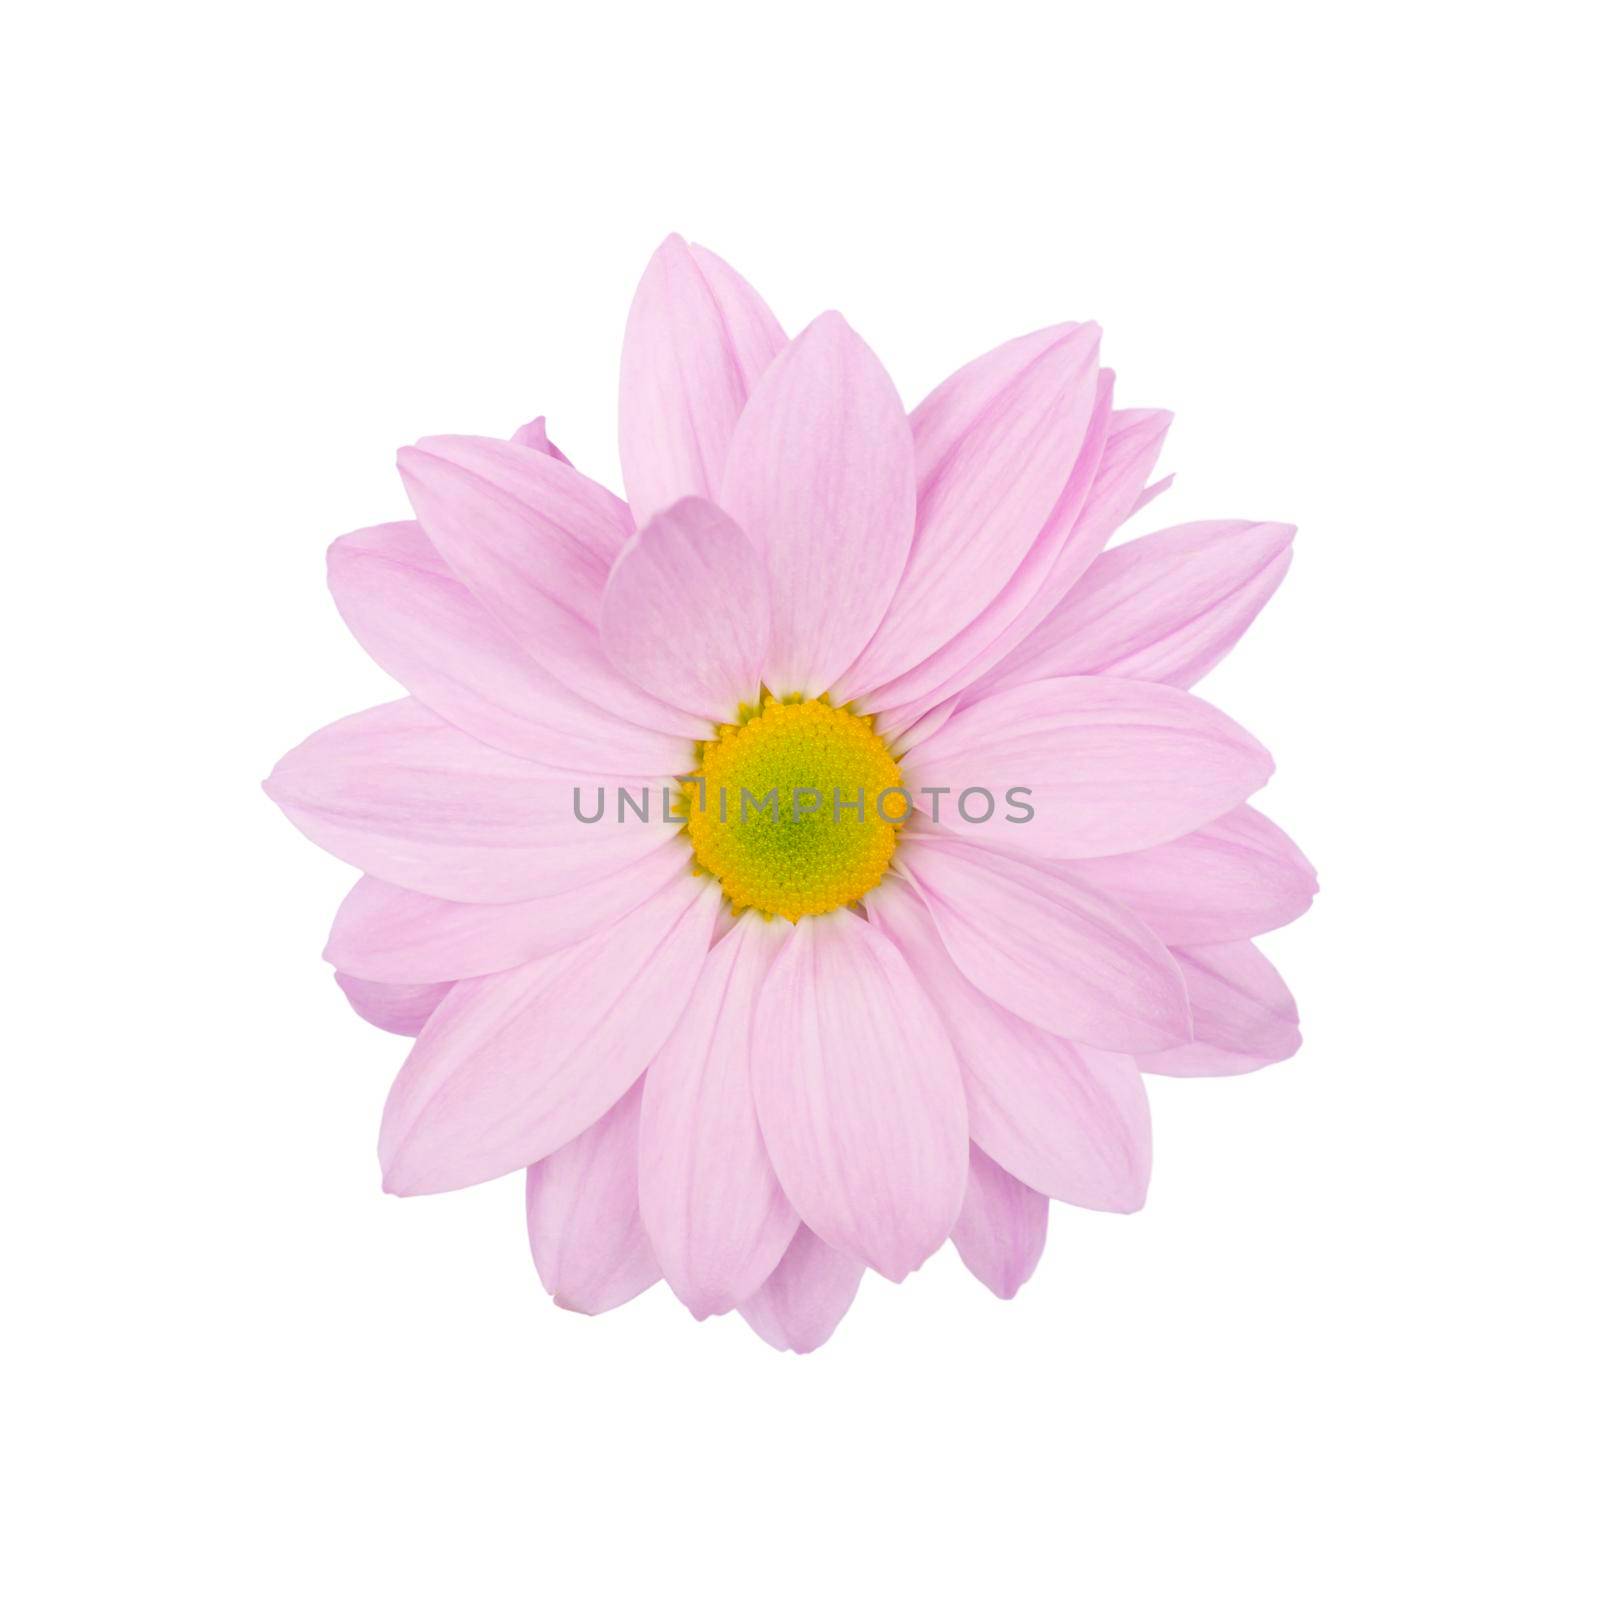 lilac daisy, chamomile or chrysanthemum macro photo isolated . Flower head isolated close up.